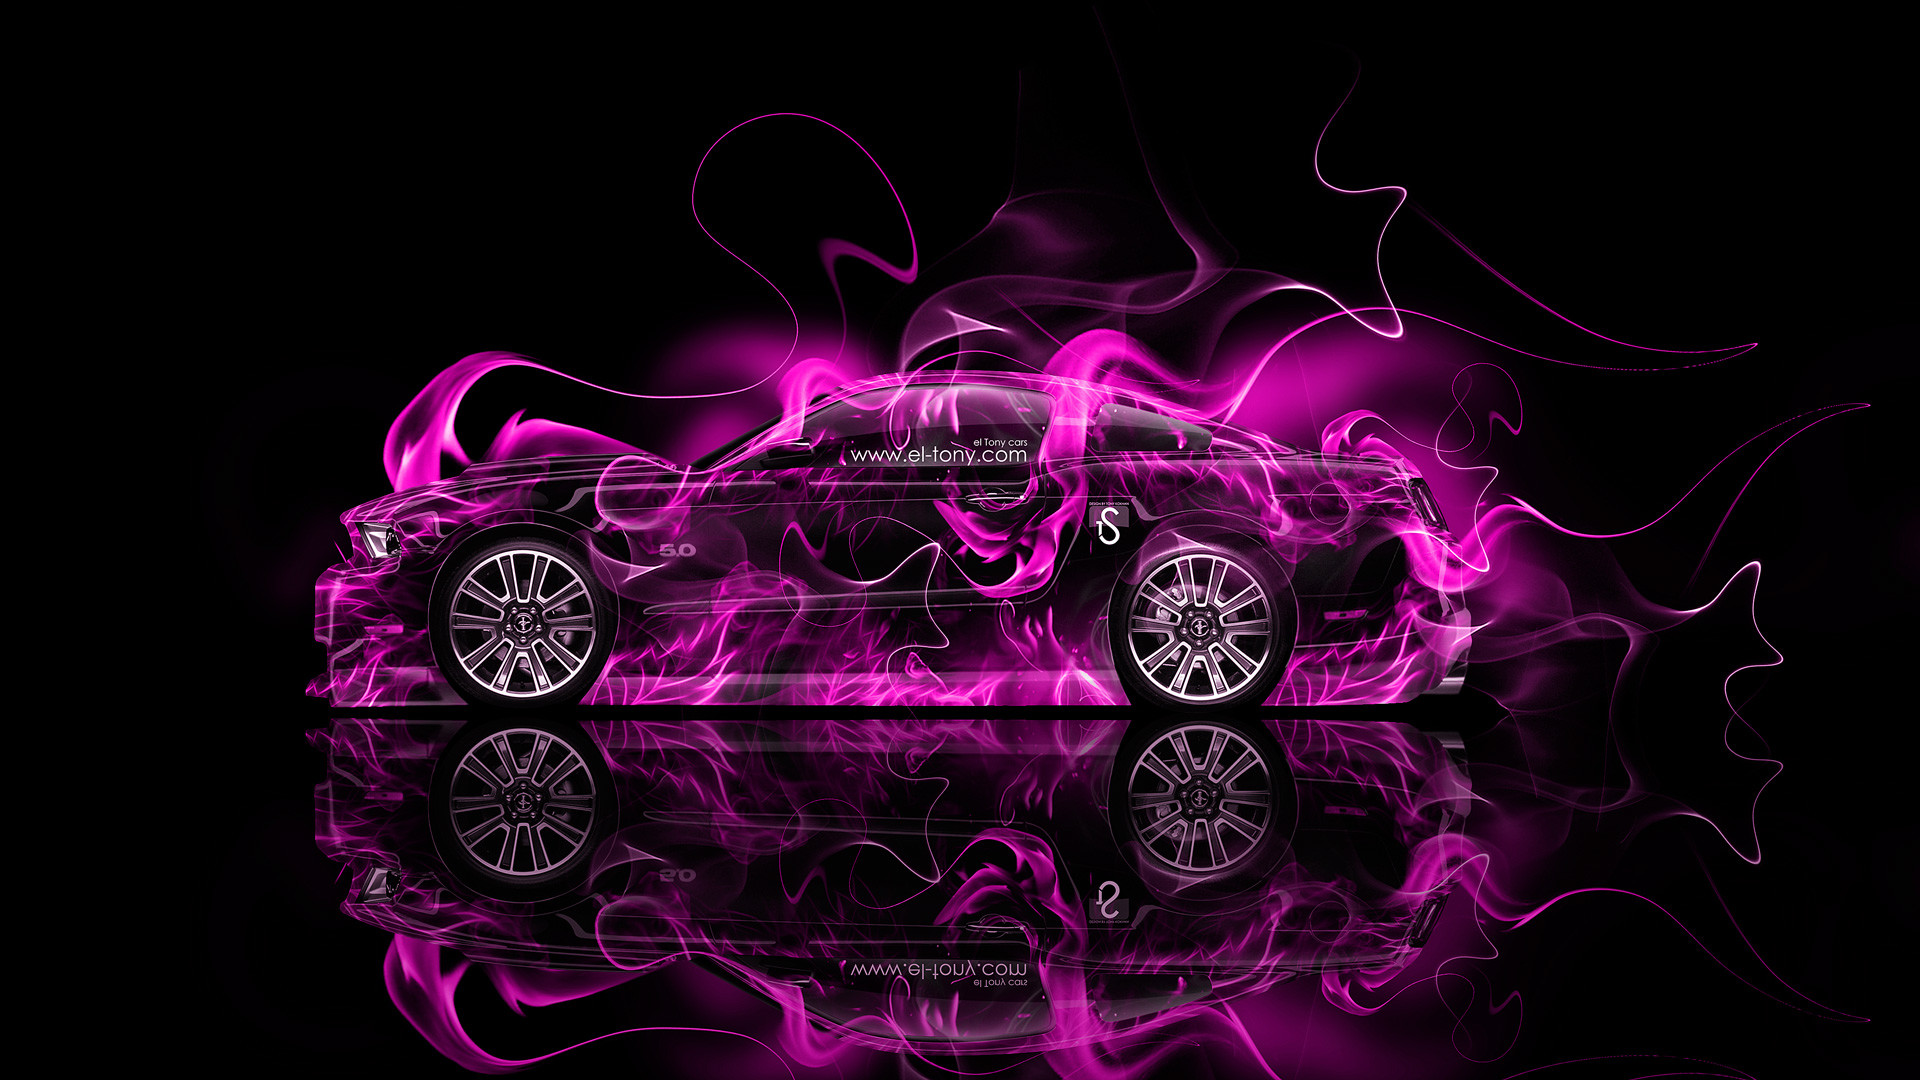 1920x1080 Pink And Black Ford Wallpaper 25 Cool Wallpaper. Pink And Black Ford  Wallpaper 25 Cool Wallpaper